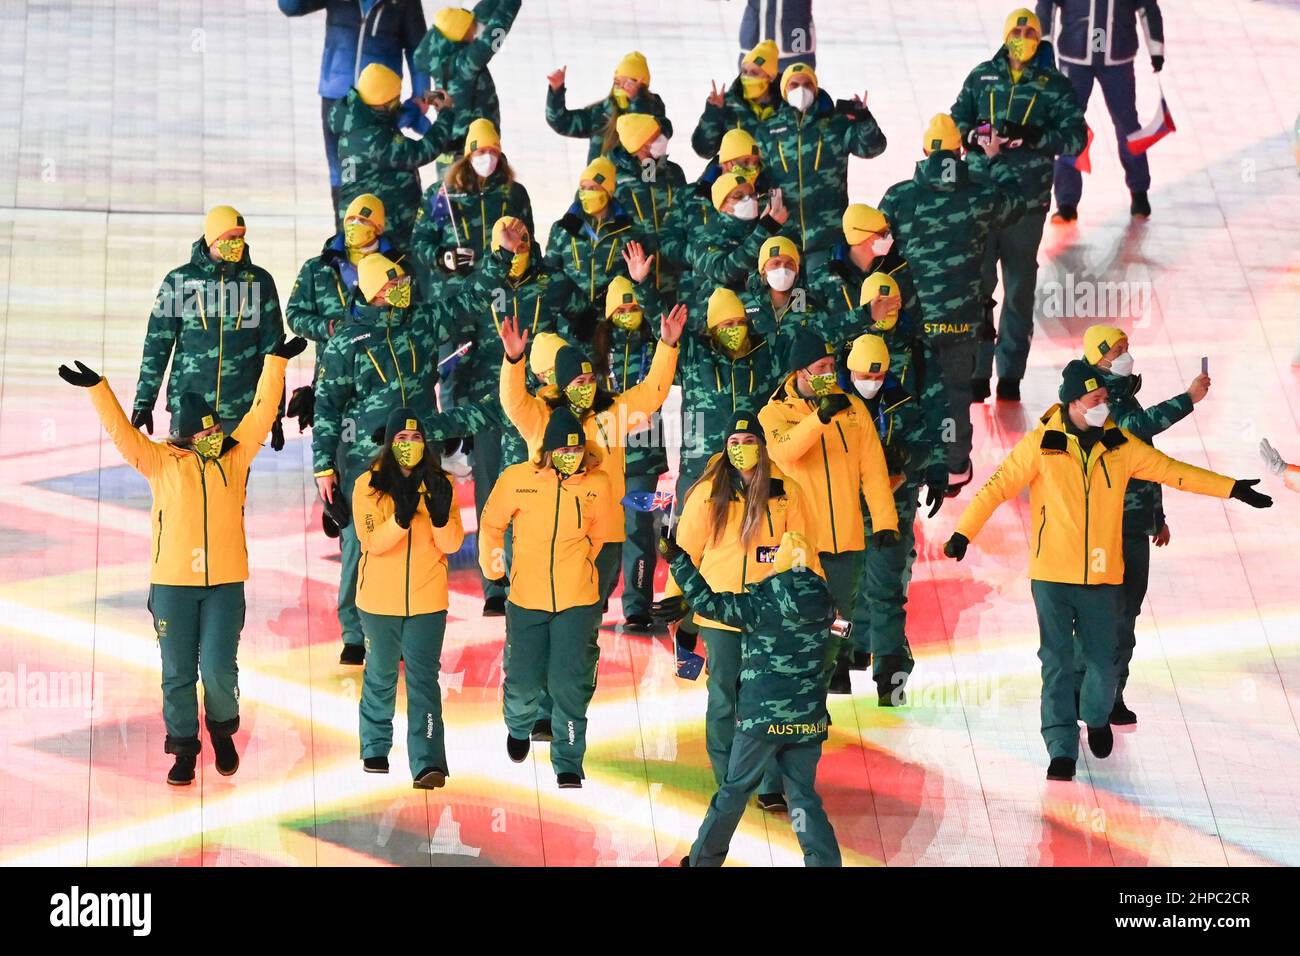 (220220) -- BEIJING, Feb. 20, 2022 (Xinhua) -- Athletes of Australia parade during the closing ceremony of the Beijing 2022 Olympic Winter Games at the National Stadium in Beijing, capital of China, Feb. 20, 2022. (Xinhua/Huang Zongzhi) Stock Photo